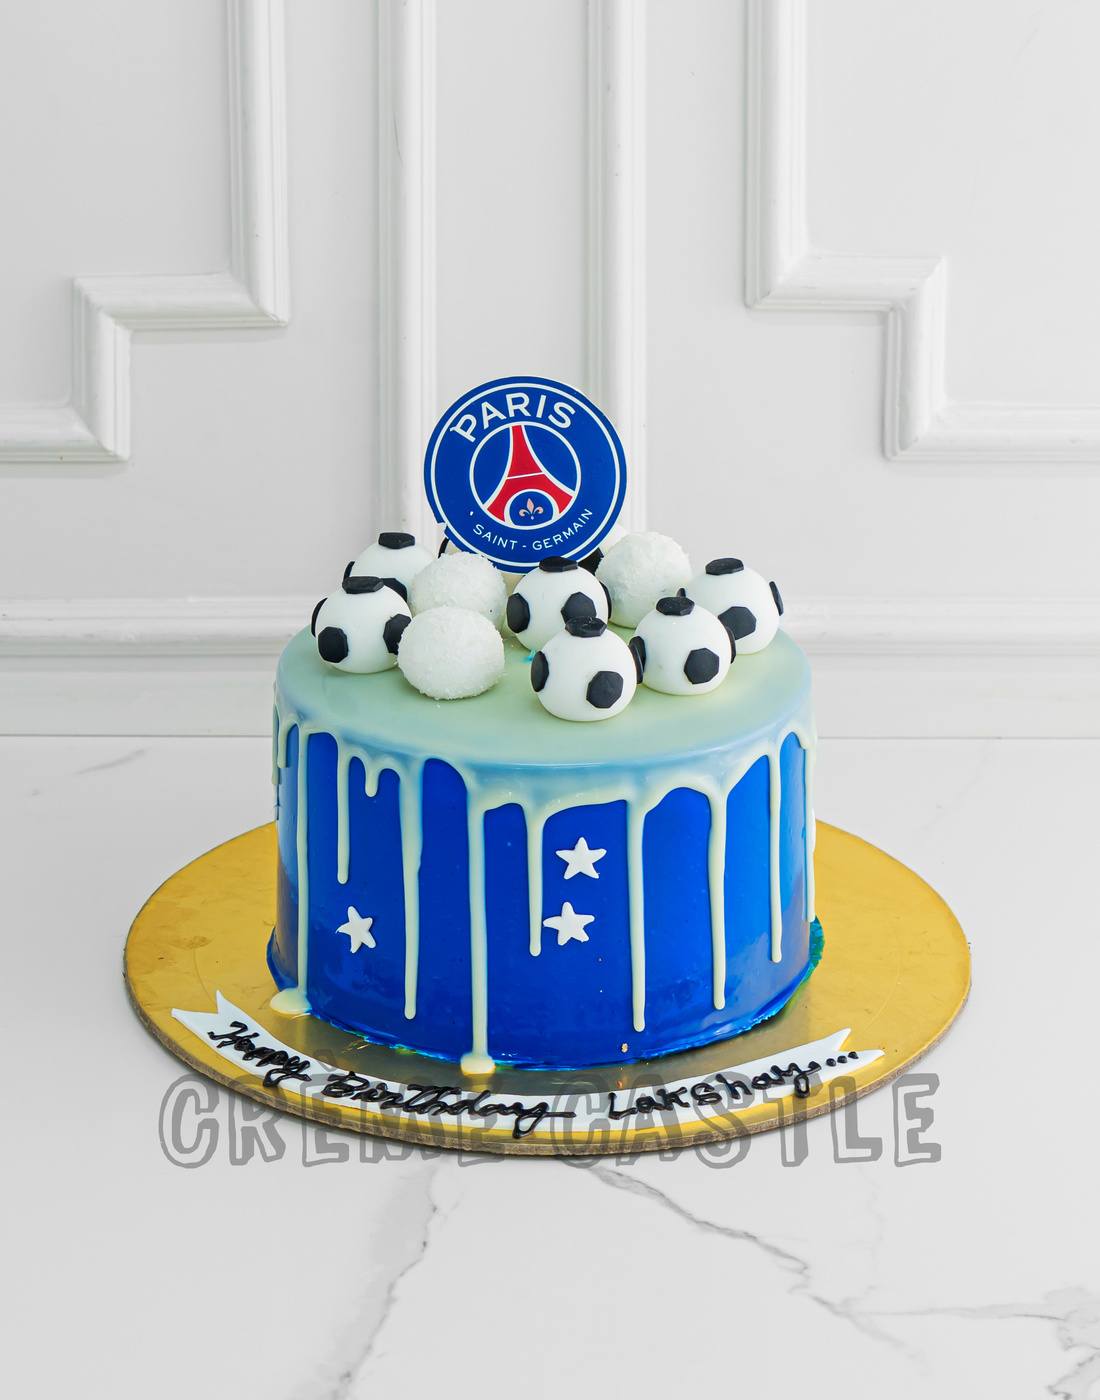 A Paris Themed Cake Made For A Beautiful Friends Birthday Celebrations |  Paris themed cakes, Paris birthday cakes, Themed cakes